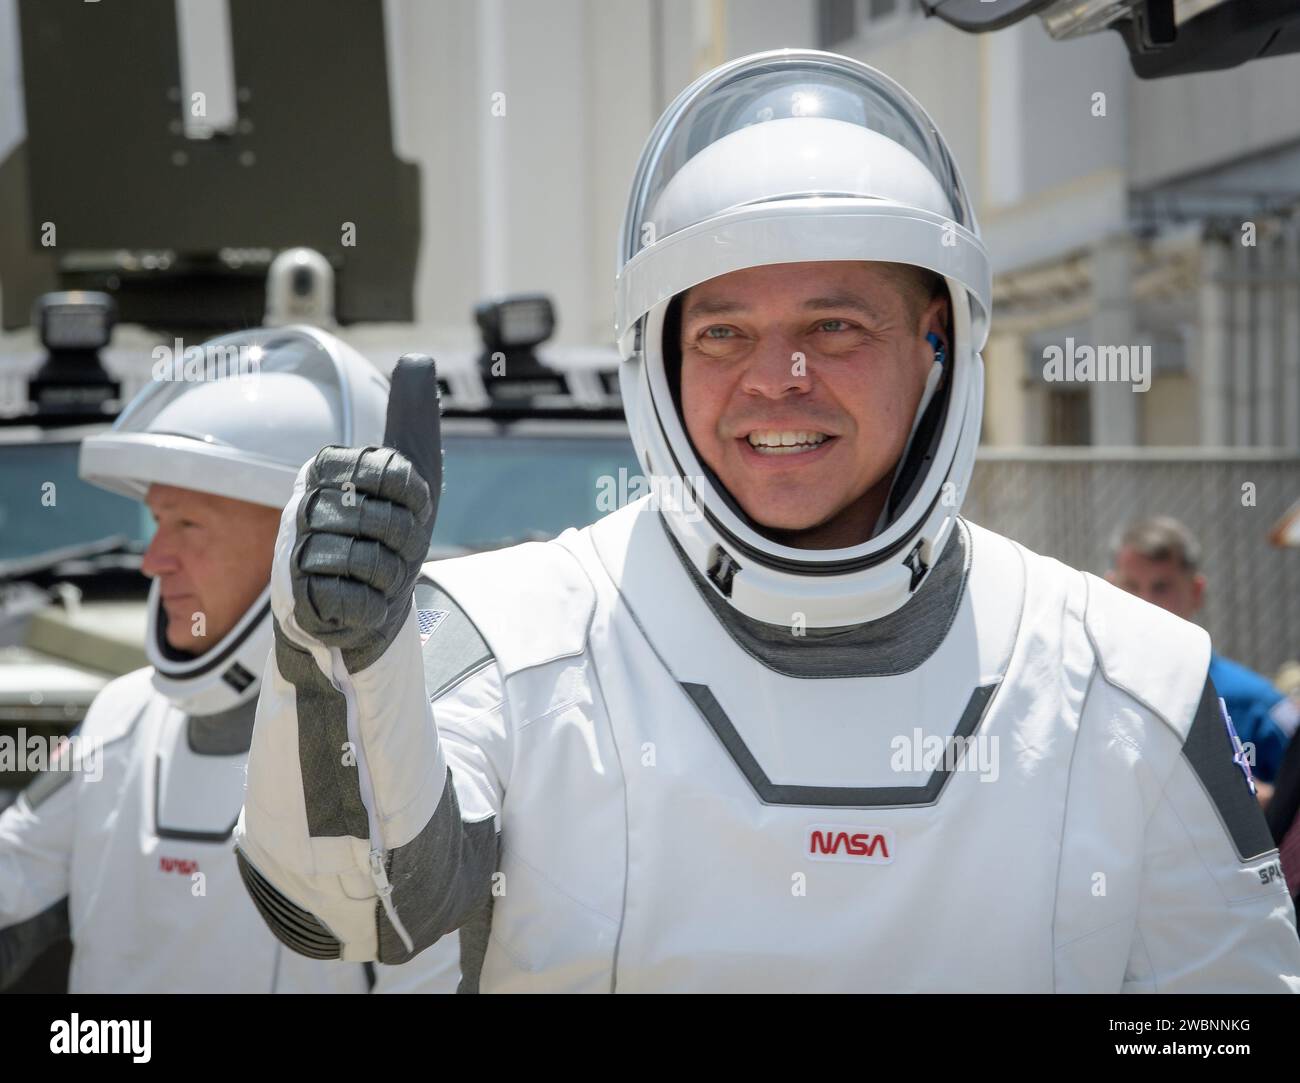 NASA astronauts Robert Behnken, foreground, and Douglas Hurley, wearing SpaceX spacesuits, are seen as they depart the Neil A. Armstrong Operations and Checkout Building for Launch Complex 39A to board the SpaceX Crew Dragon spacecraft for the Demo-2 mission launch, Saturday, May 30, 2020, at NASA’s Kennedy Space Center in Florida. NASA’s SpaceX Demo-2 mission is the first launch with astronauts of the SpaceX Crew Dragon spacecraft and Falcon 9 rocket to the International Space Station as part of the agency’s Commercial Crew Program. The test flight serves as an end-to-end demonstration of Spa Stock Photo